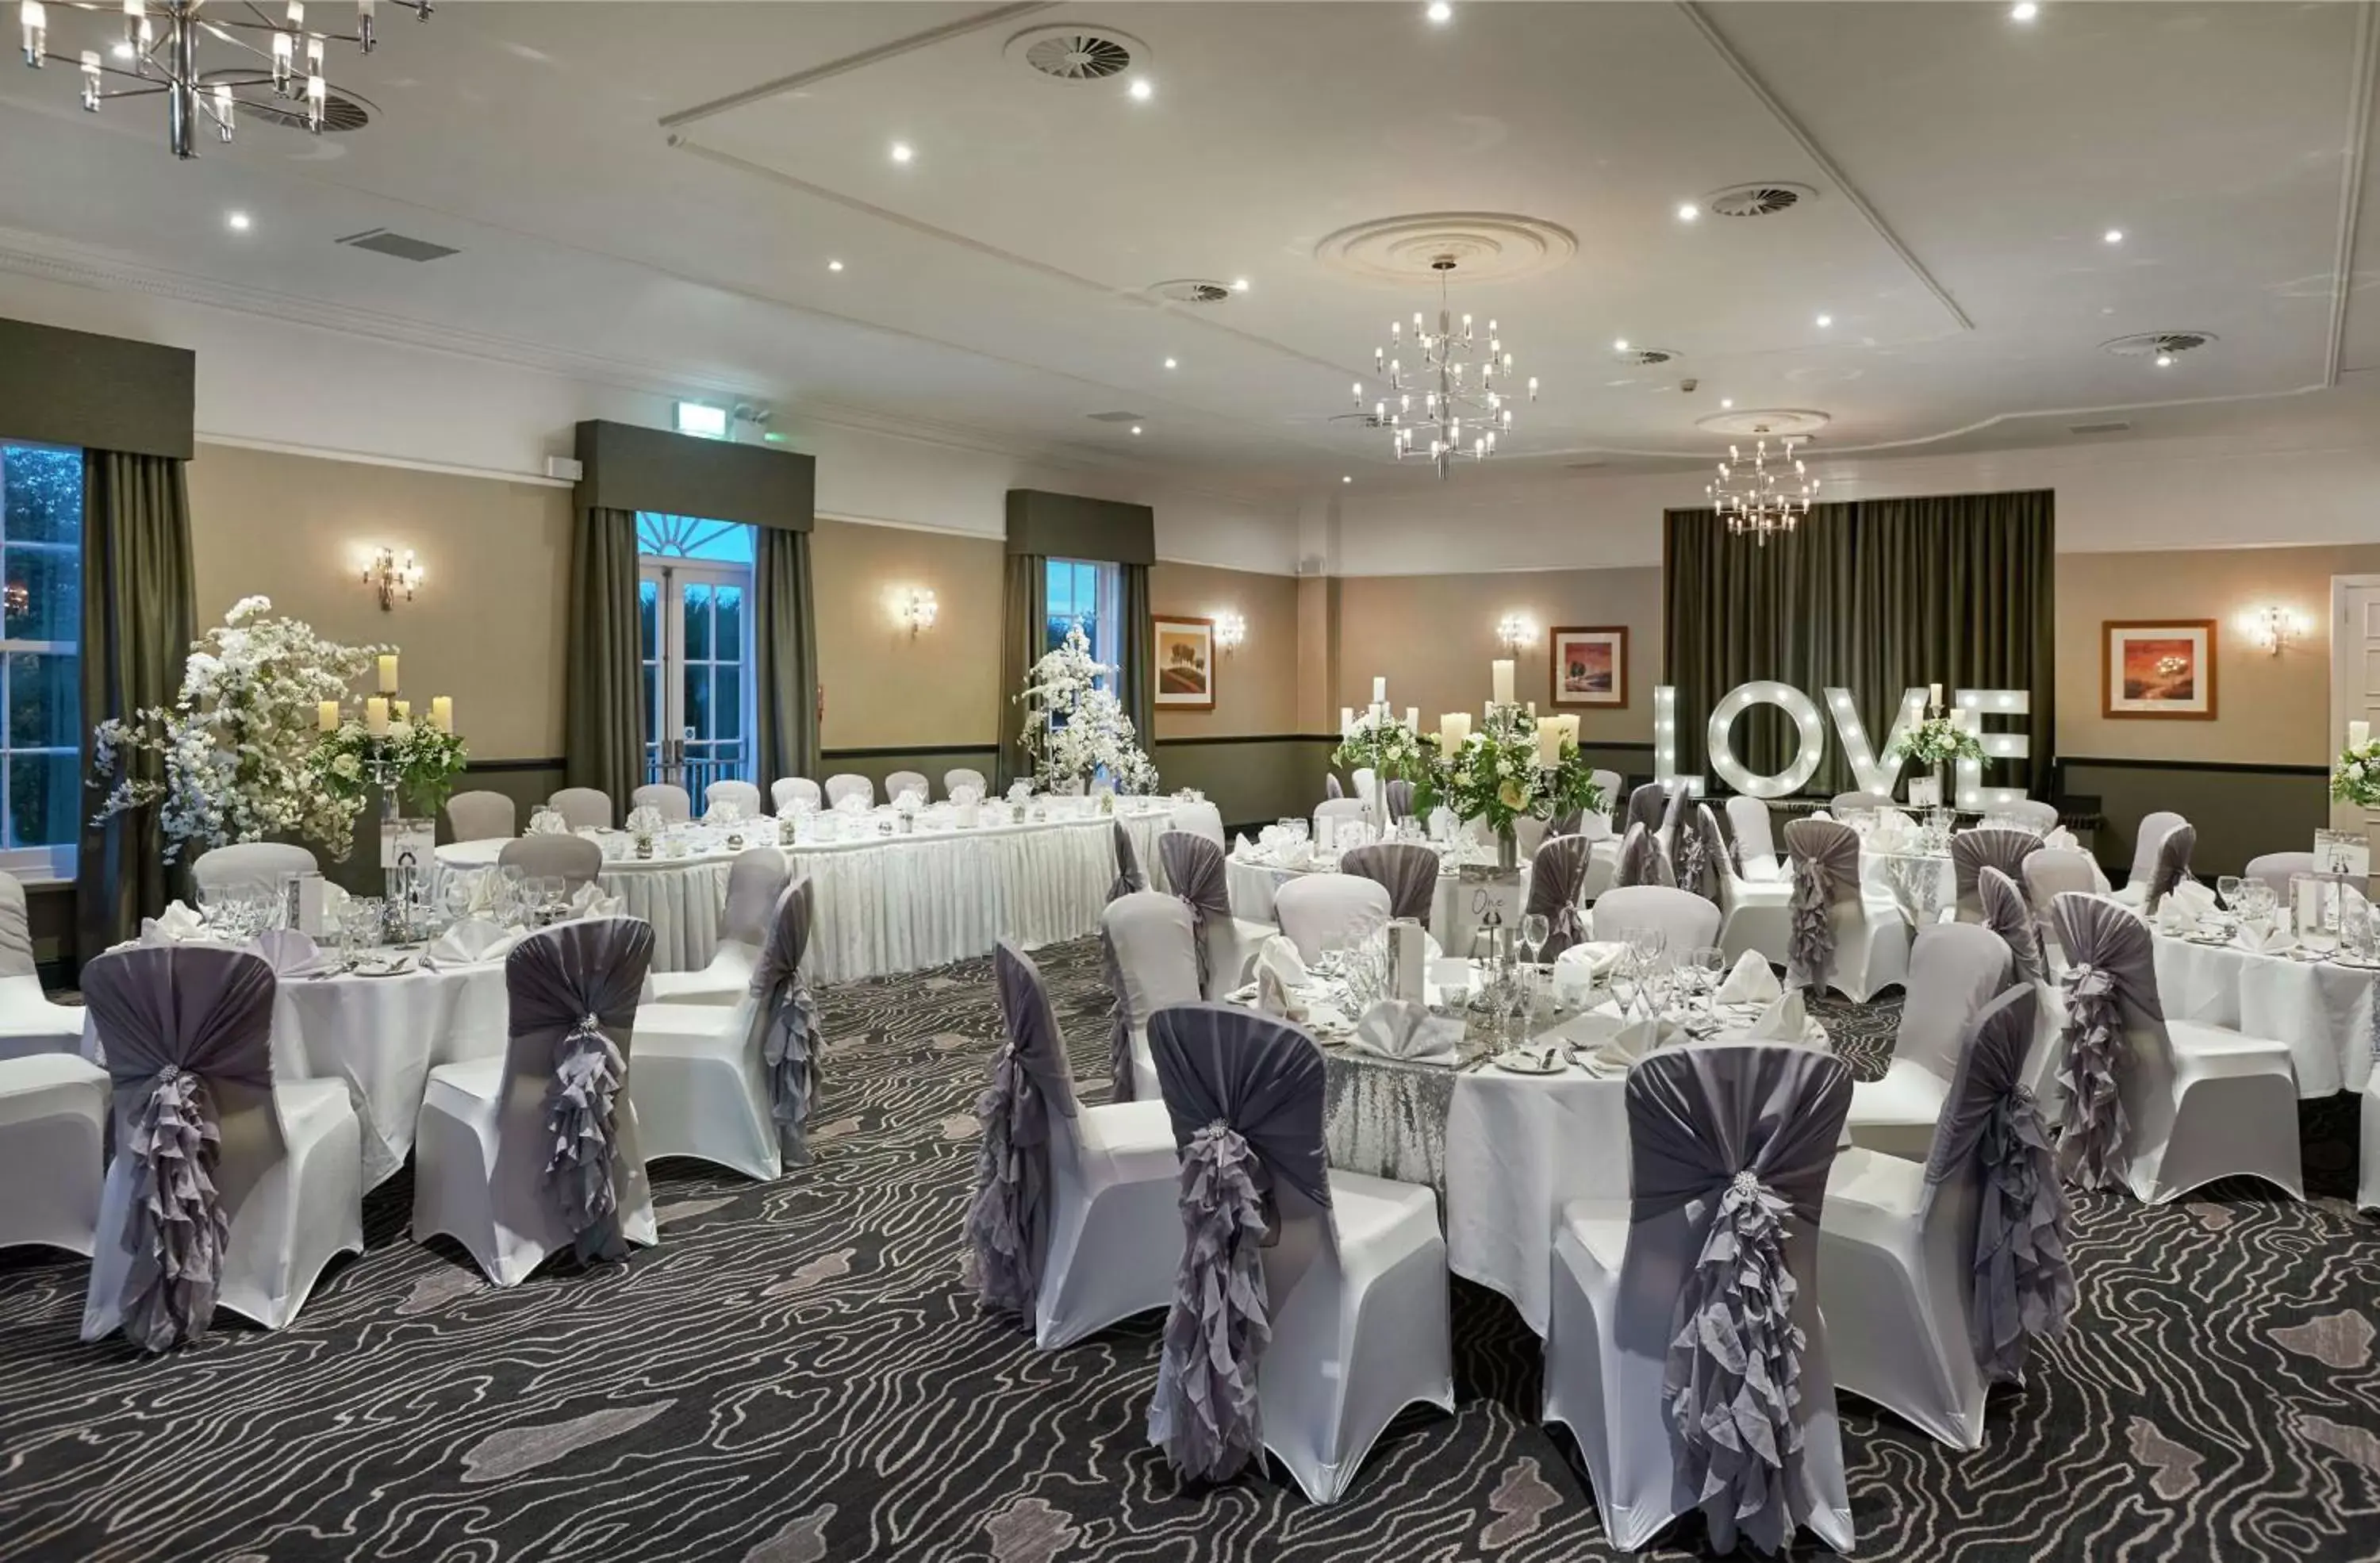 Meeting/conference room, Banquet Facilities in Hilton Puckrup Hall, Tewkesbury